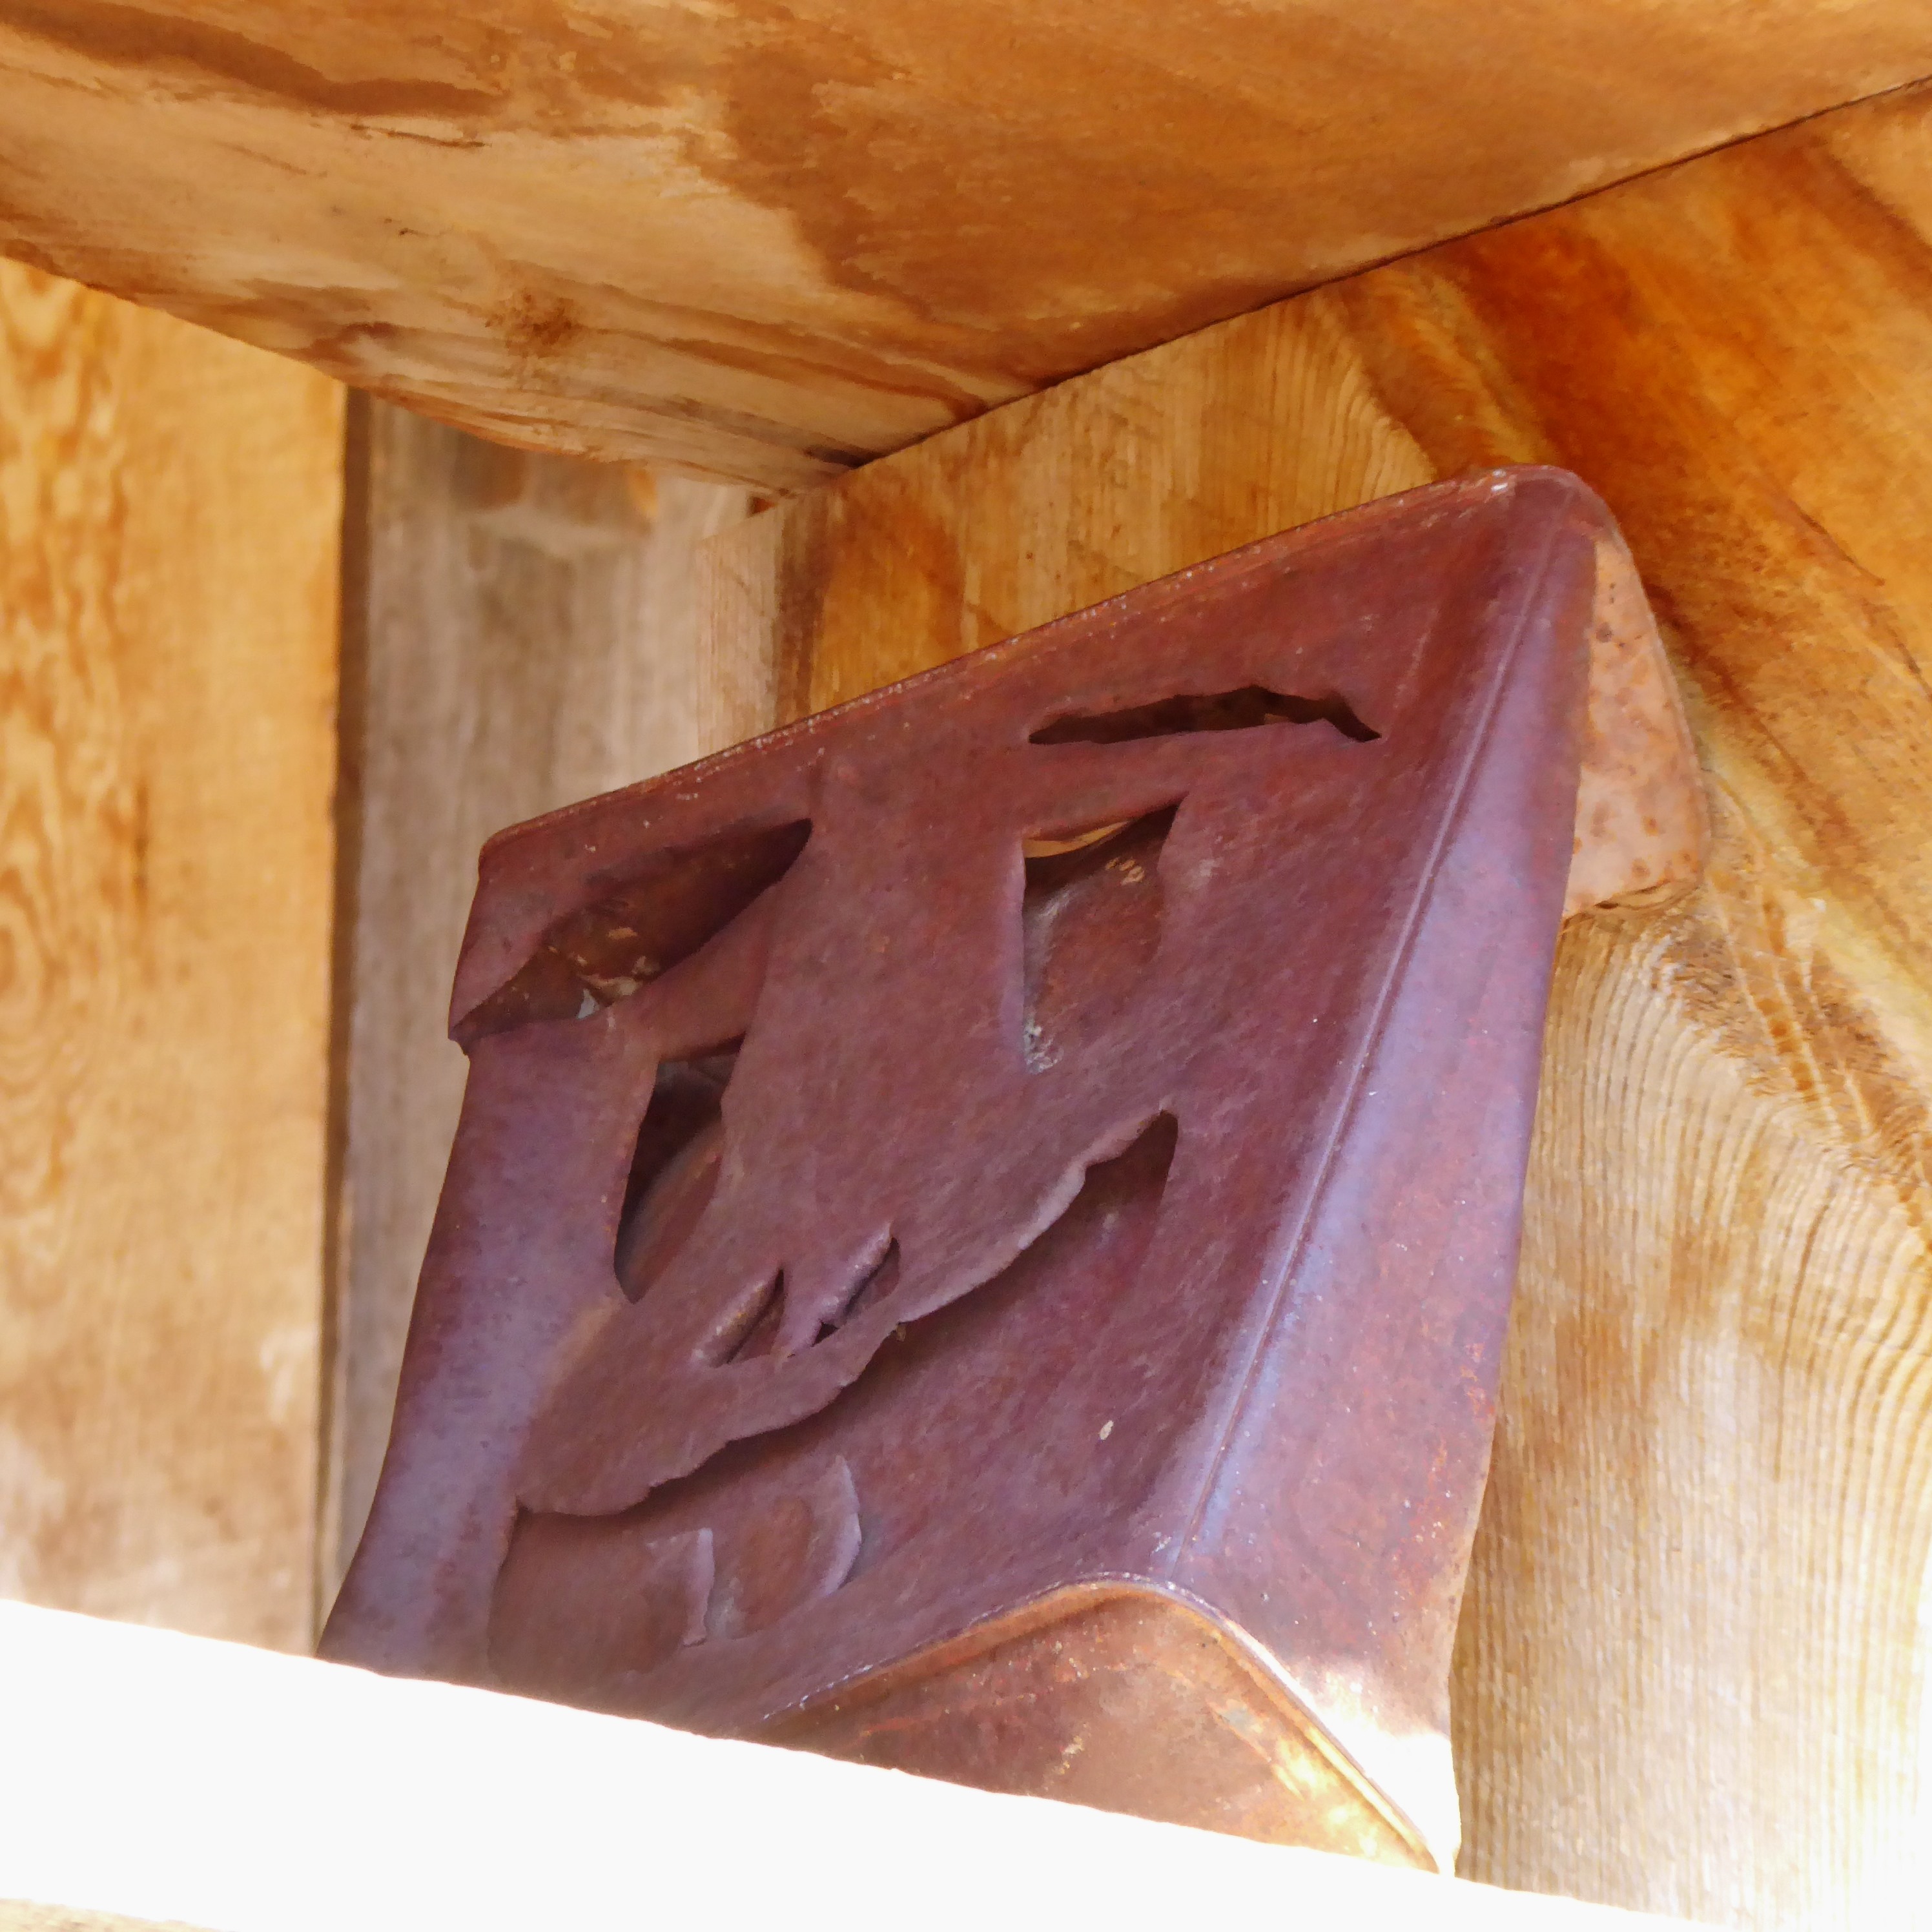 A face carved into a can on a shelf at the Pine Cabin on the Arizona Strip